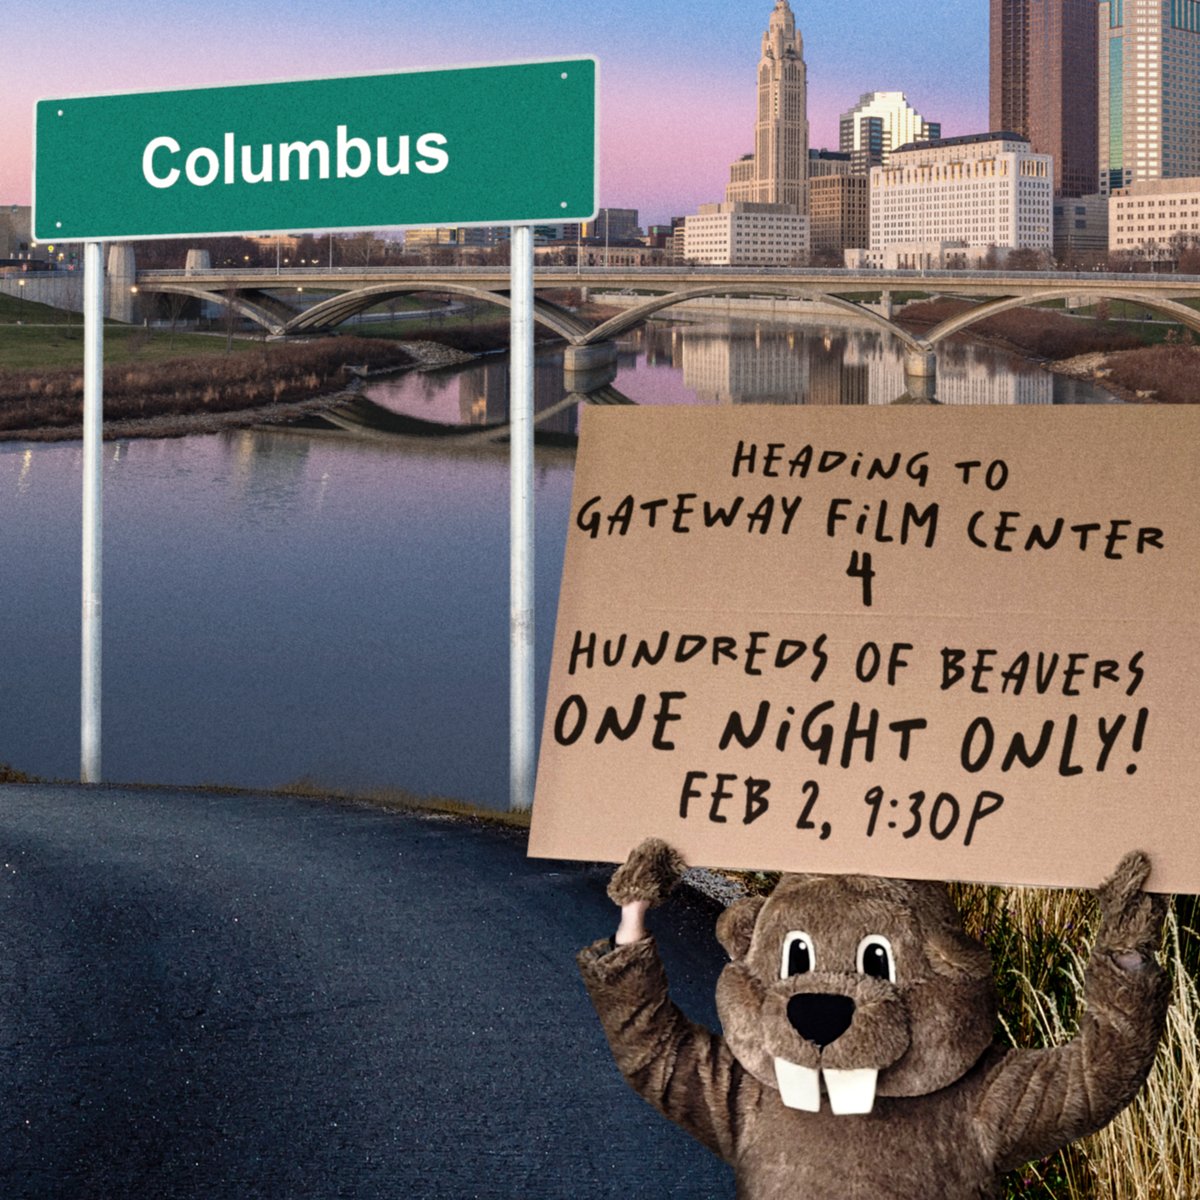 Columbus, OH! The HUNDREDS OF BEAVERS GREAT LAKES ROADSHOW heads to @GatewayFC for ONE NIGHT ONLY. Friday, February 2nd. 9:30pm. GET YOUR TICKETS NOW.

BUY TICKETS: bit.ly/3S2X0CS

#HundredsOfBeaversMovie #GreatLakesRoadShows #GatewayFilmCenter #Columbus